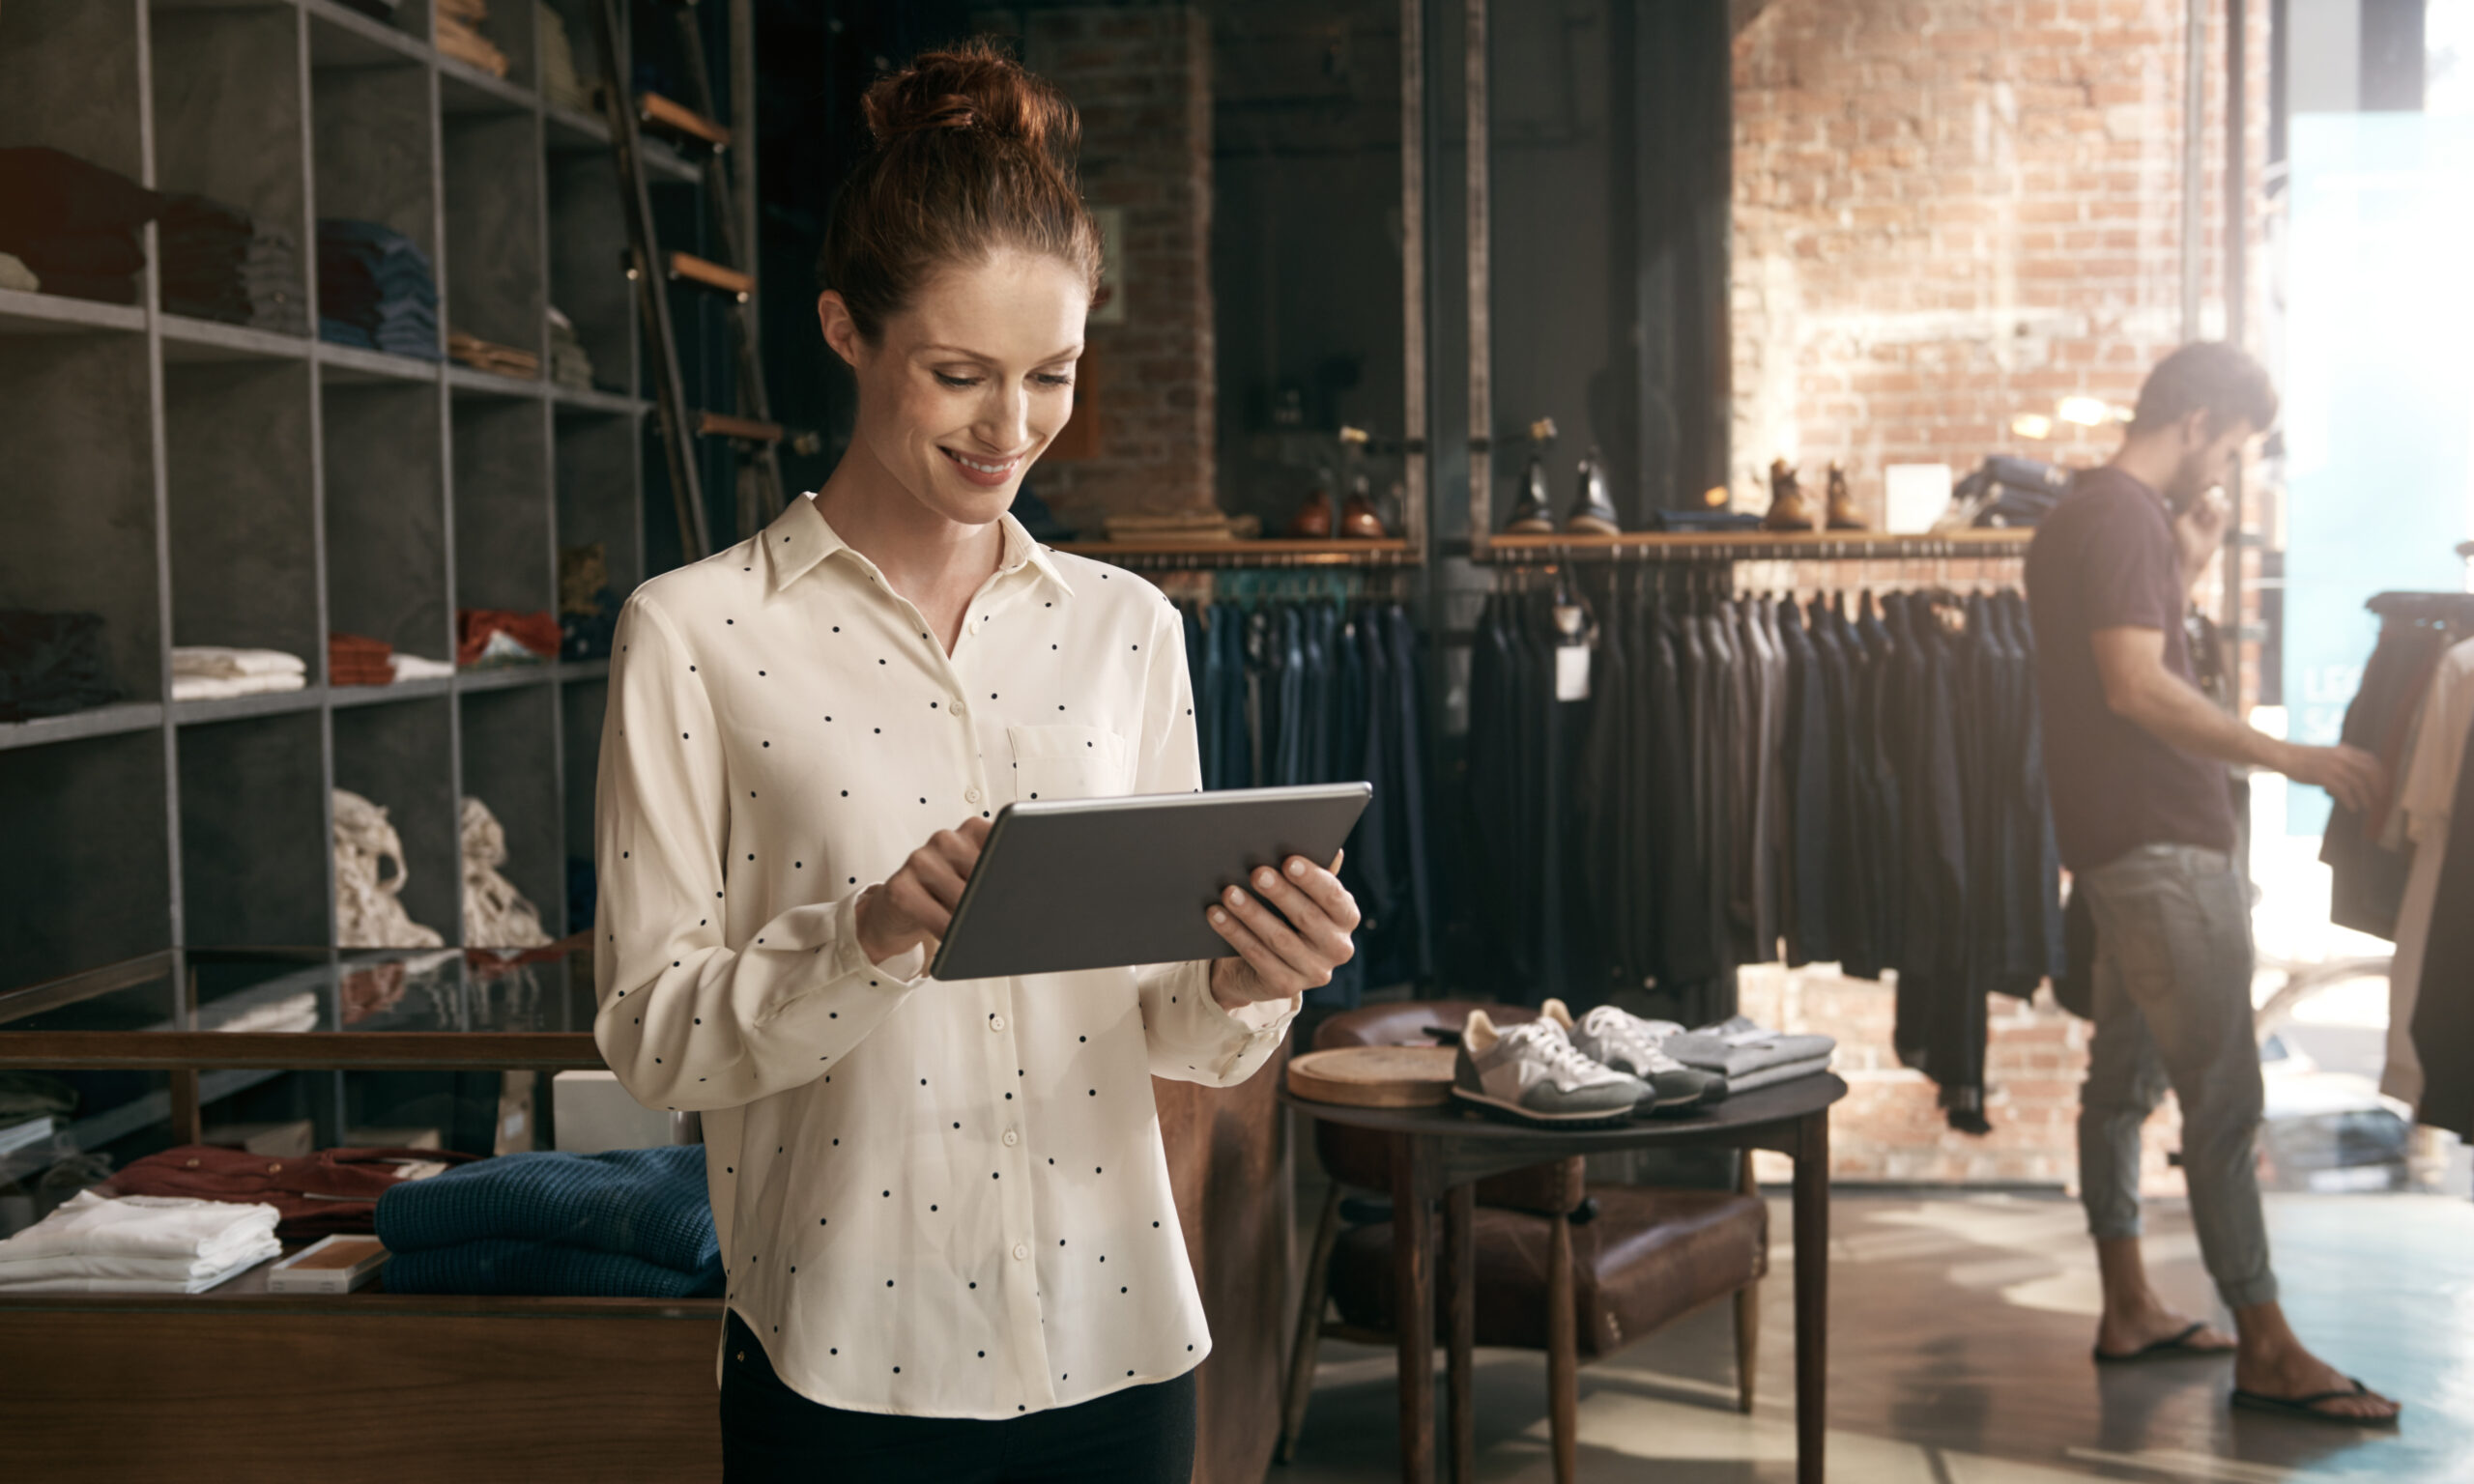 Seeing retail operations and the customer experience through retail’s digital transformation